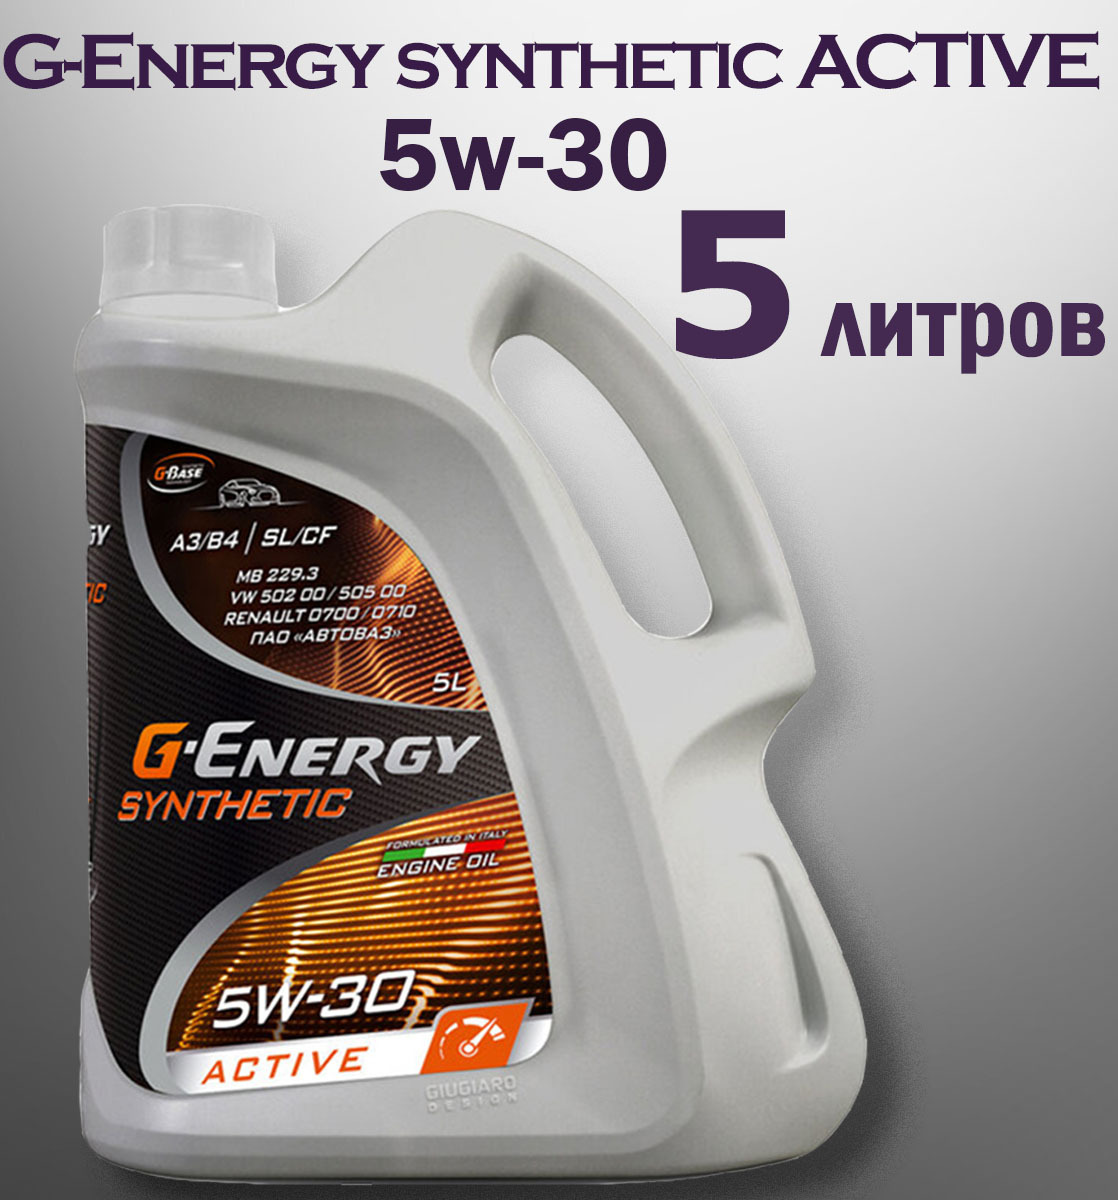 Масло g energy synthetic 5w 40. Масло g-Energy Syntetic Activ 5w30. G-Energy Synthetic Active 5w-30. G Energy 5w30 синтетика. Масло g Energy Synthetic Active 5w30.